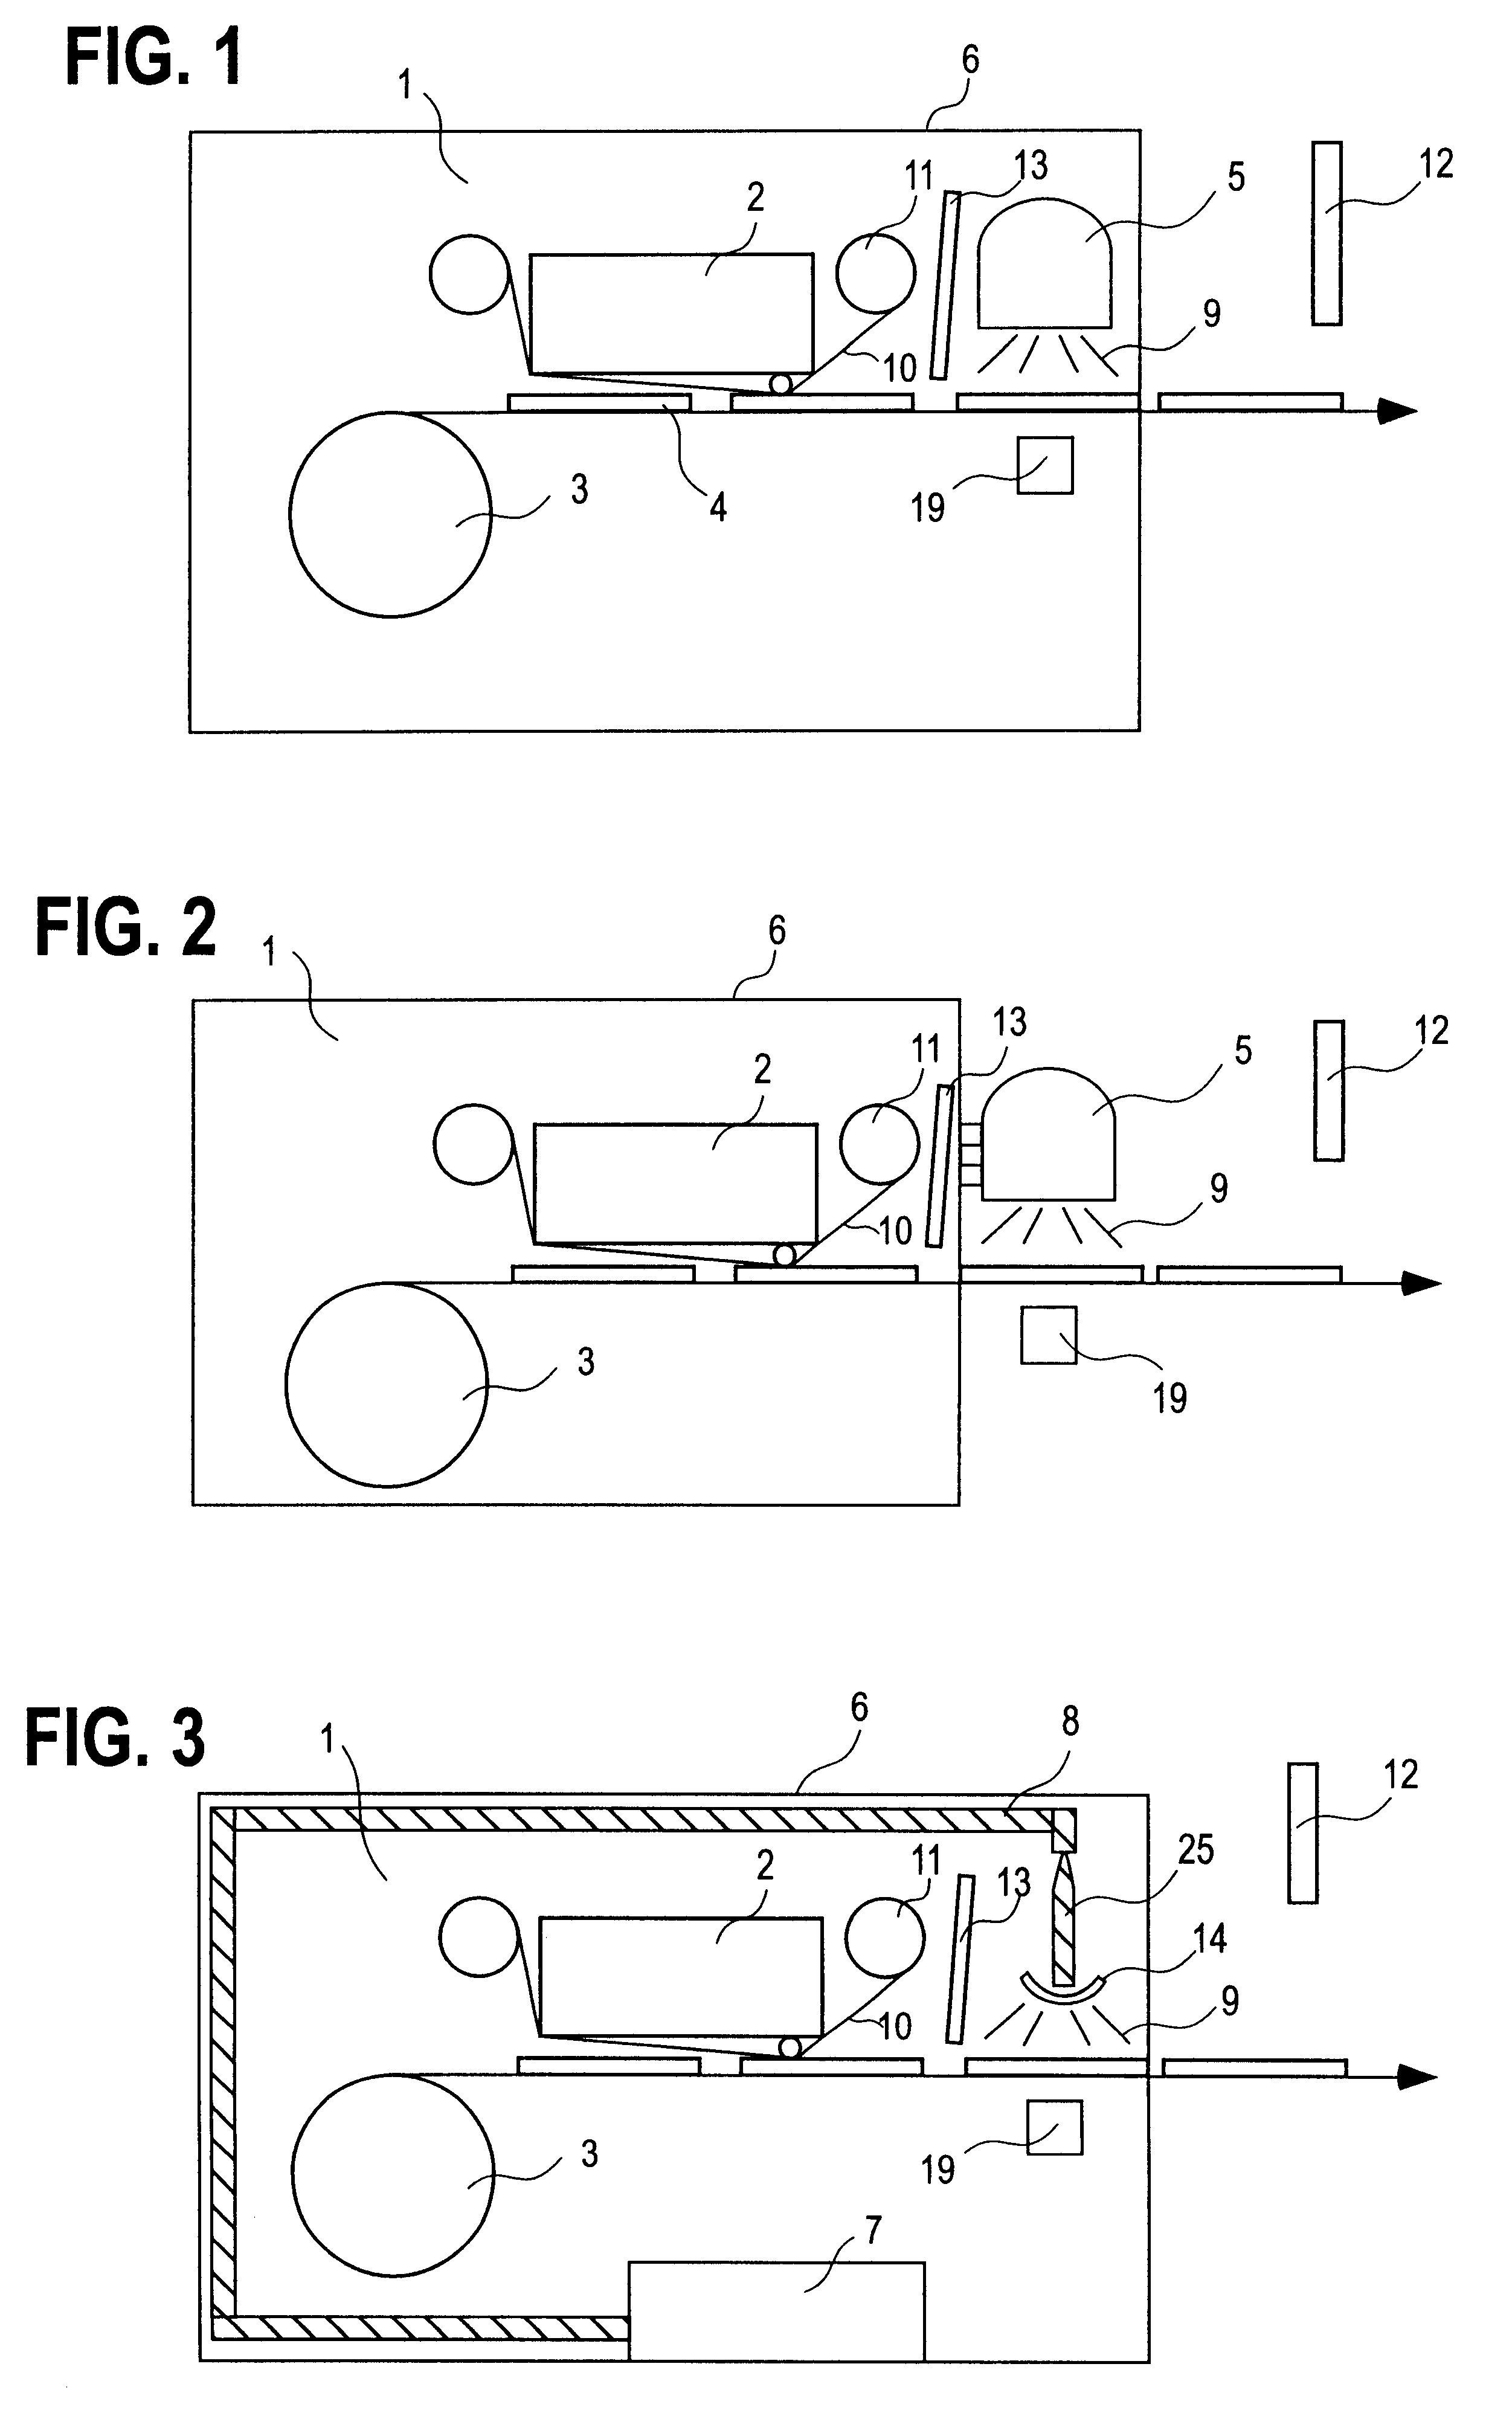 On demand printer apparatus and method with integrated UV curing